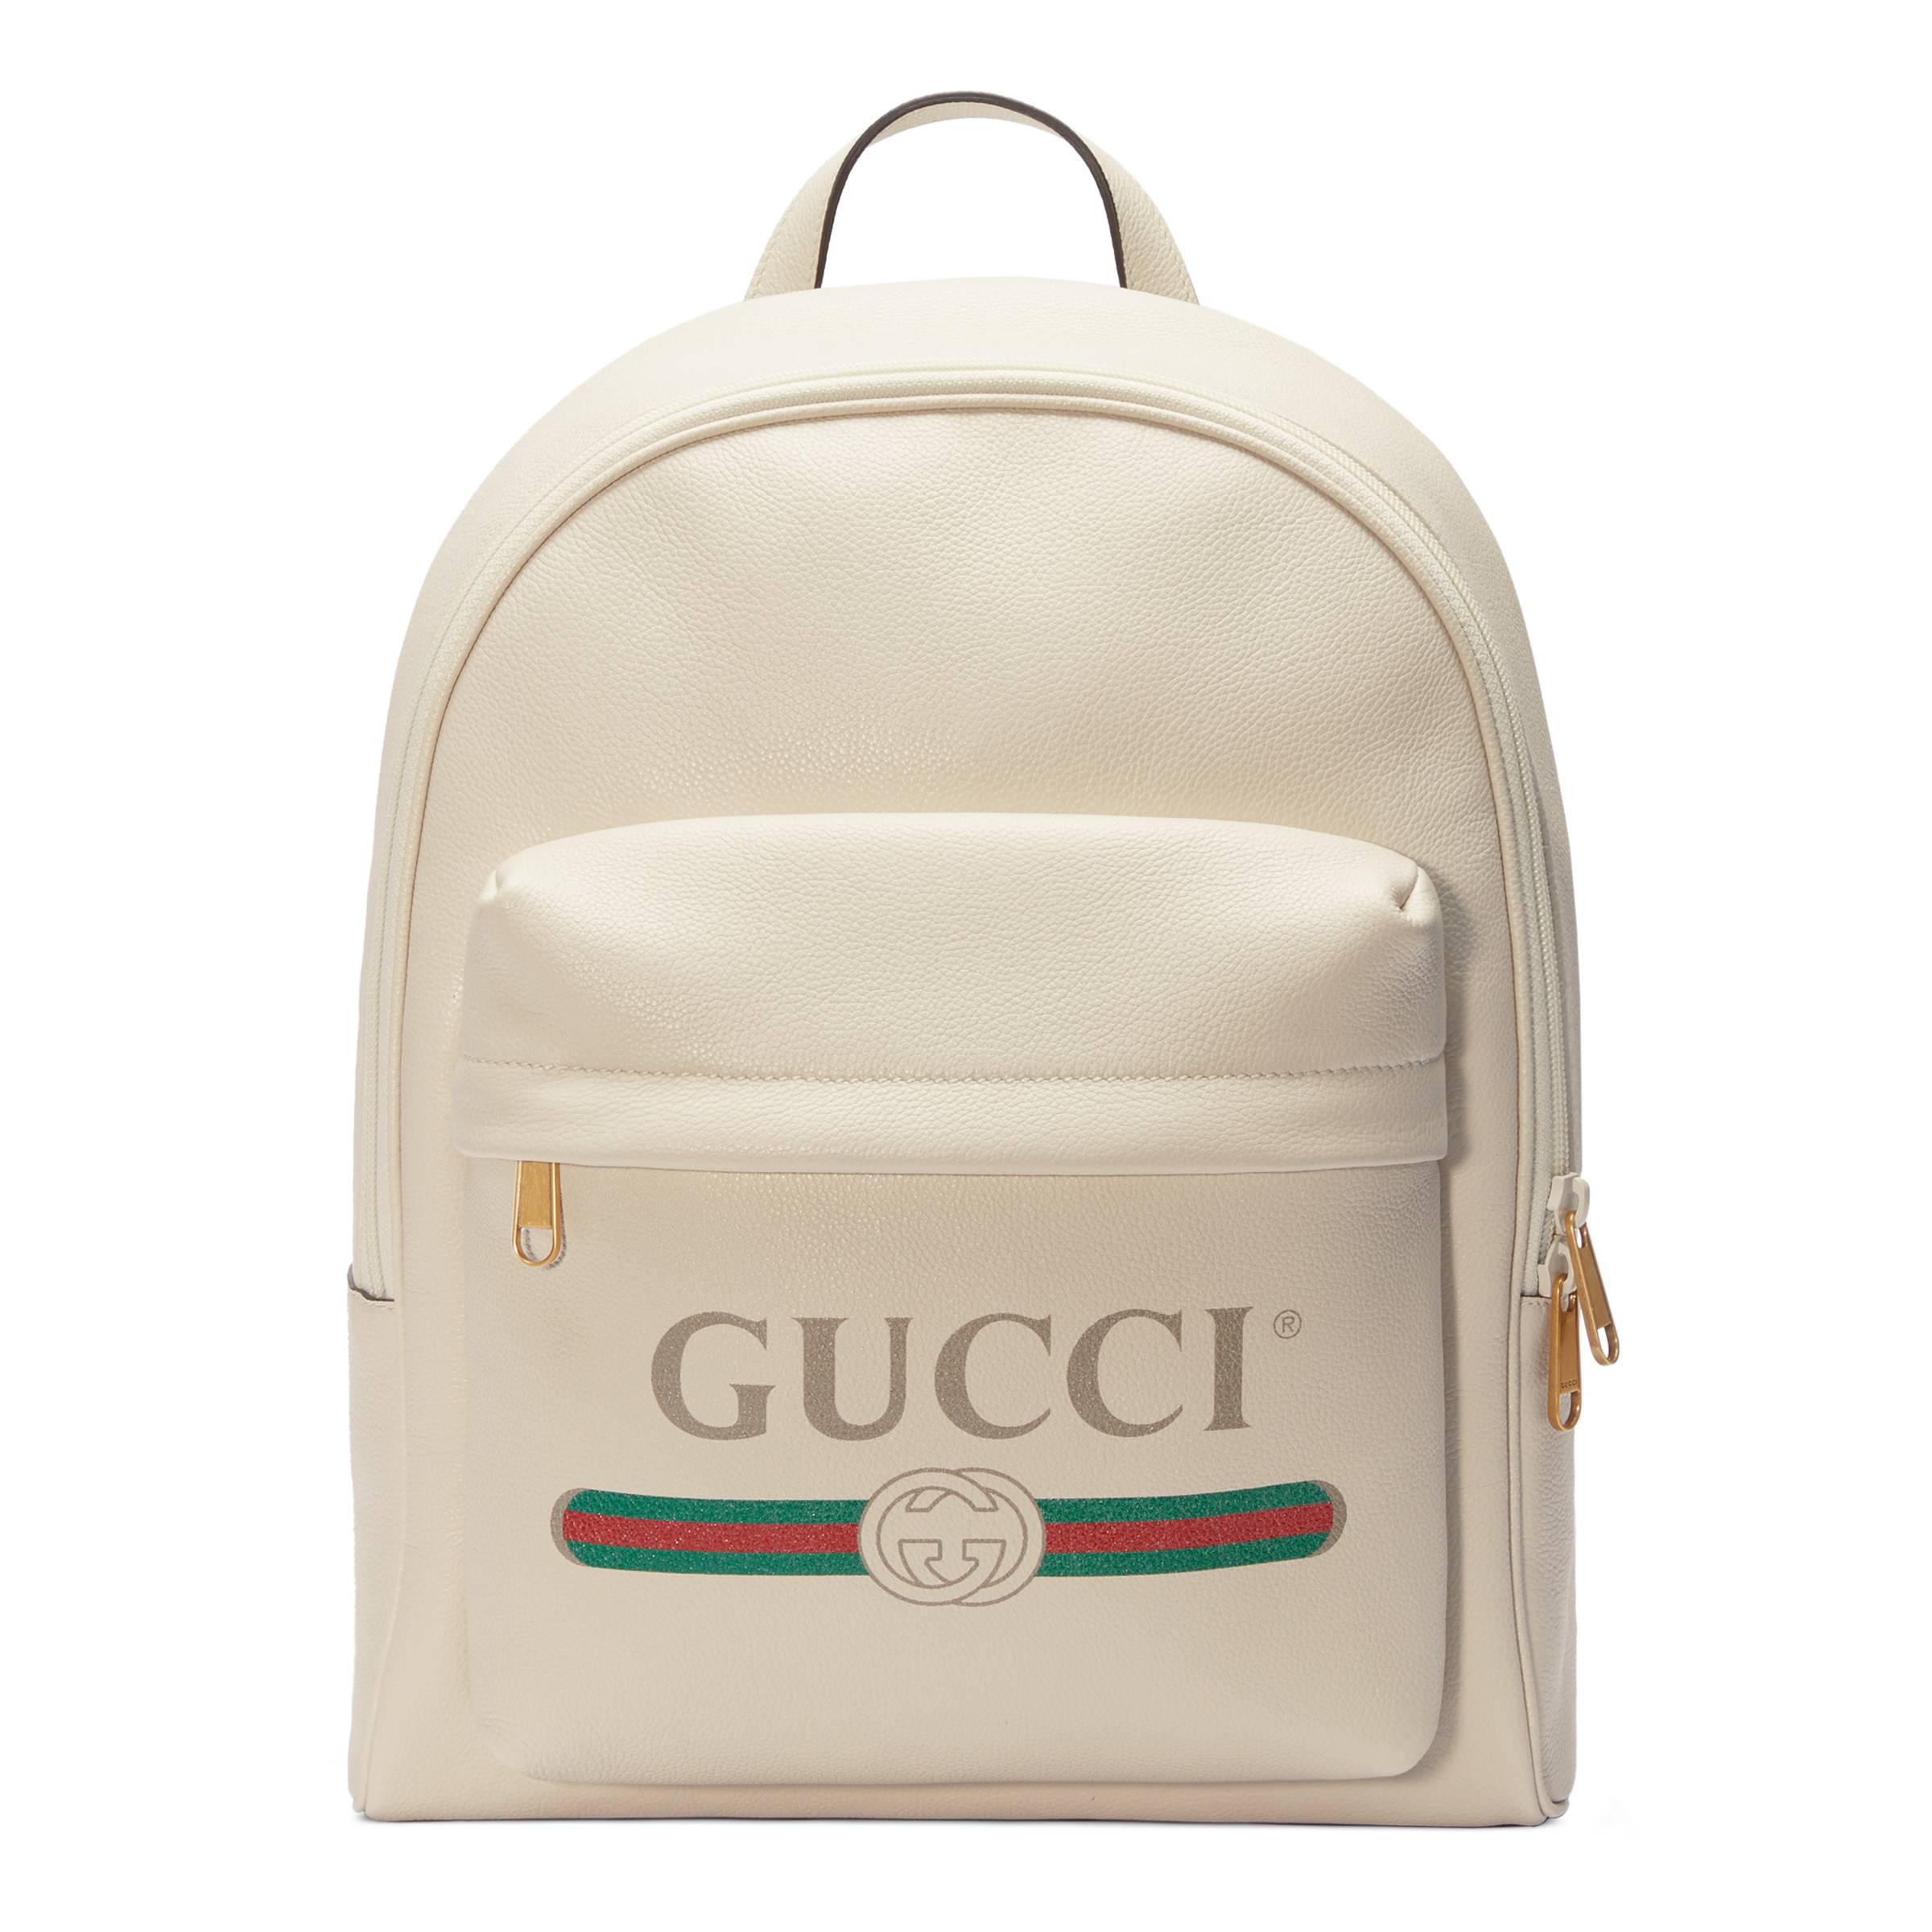 Gucci Print Leather Backpack in White 